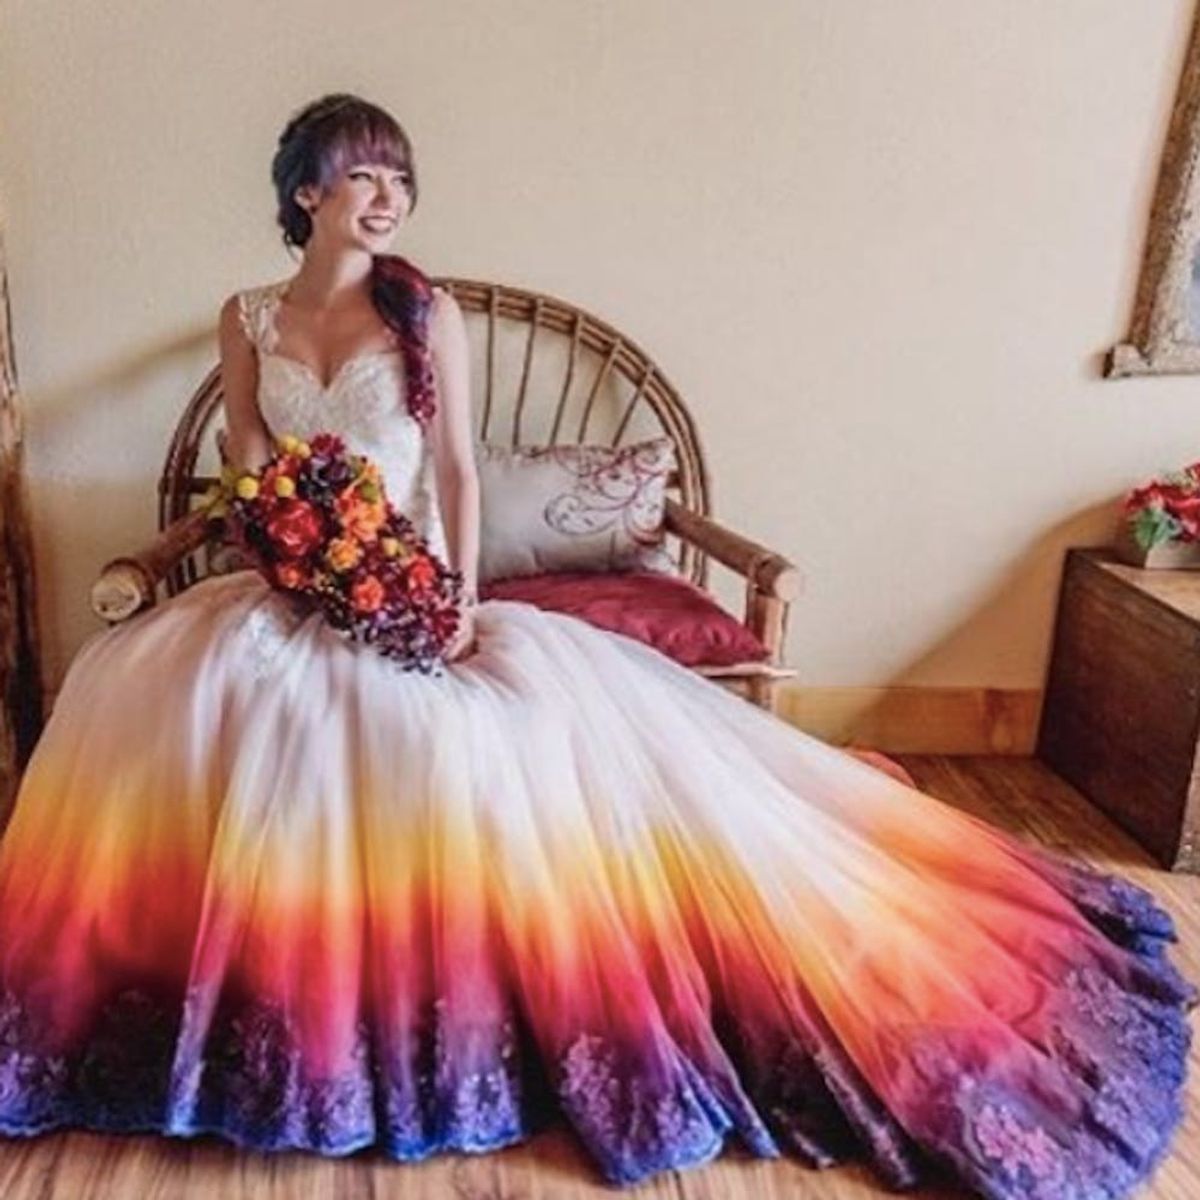 Dip-Dyed Wedding Dresses Are Our New Bridal Style Obsession